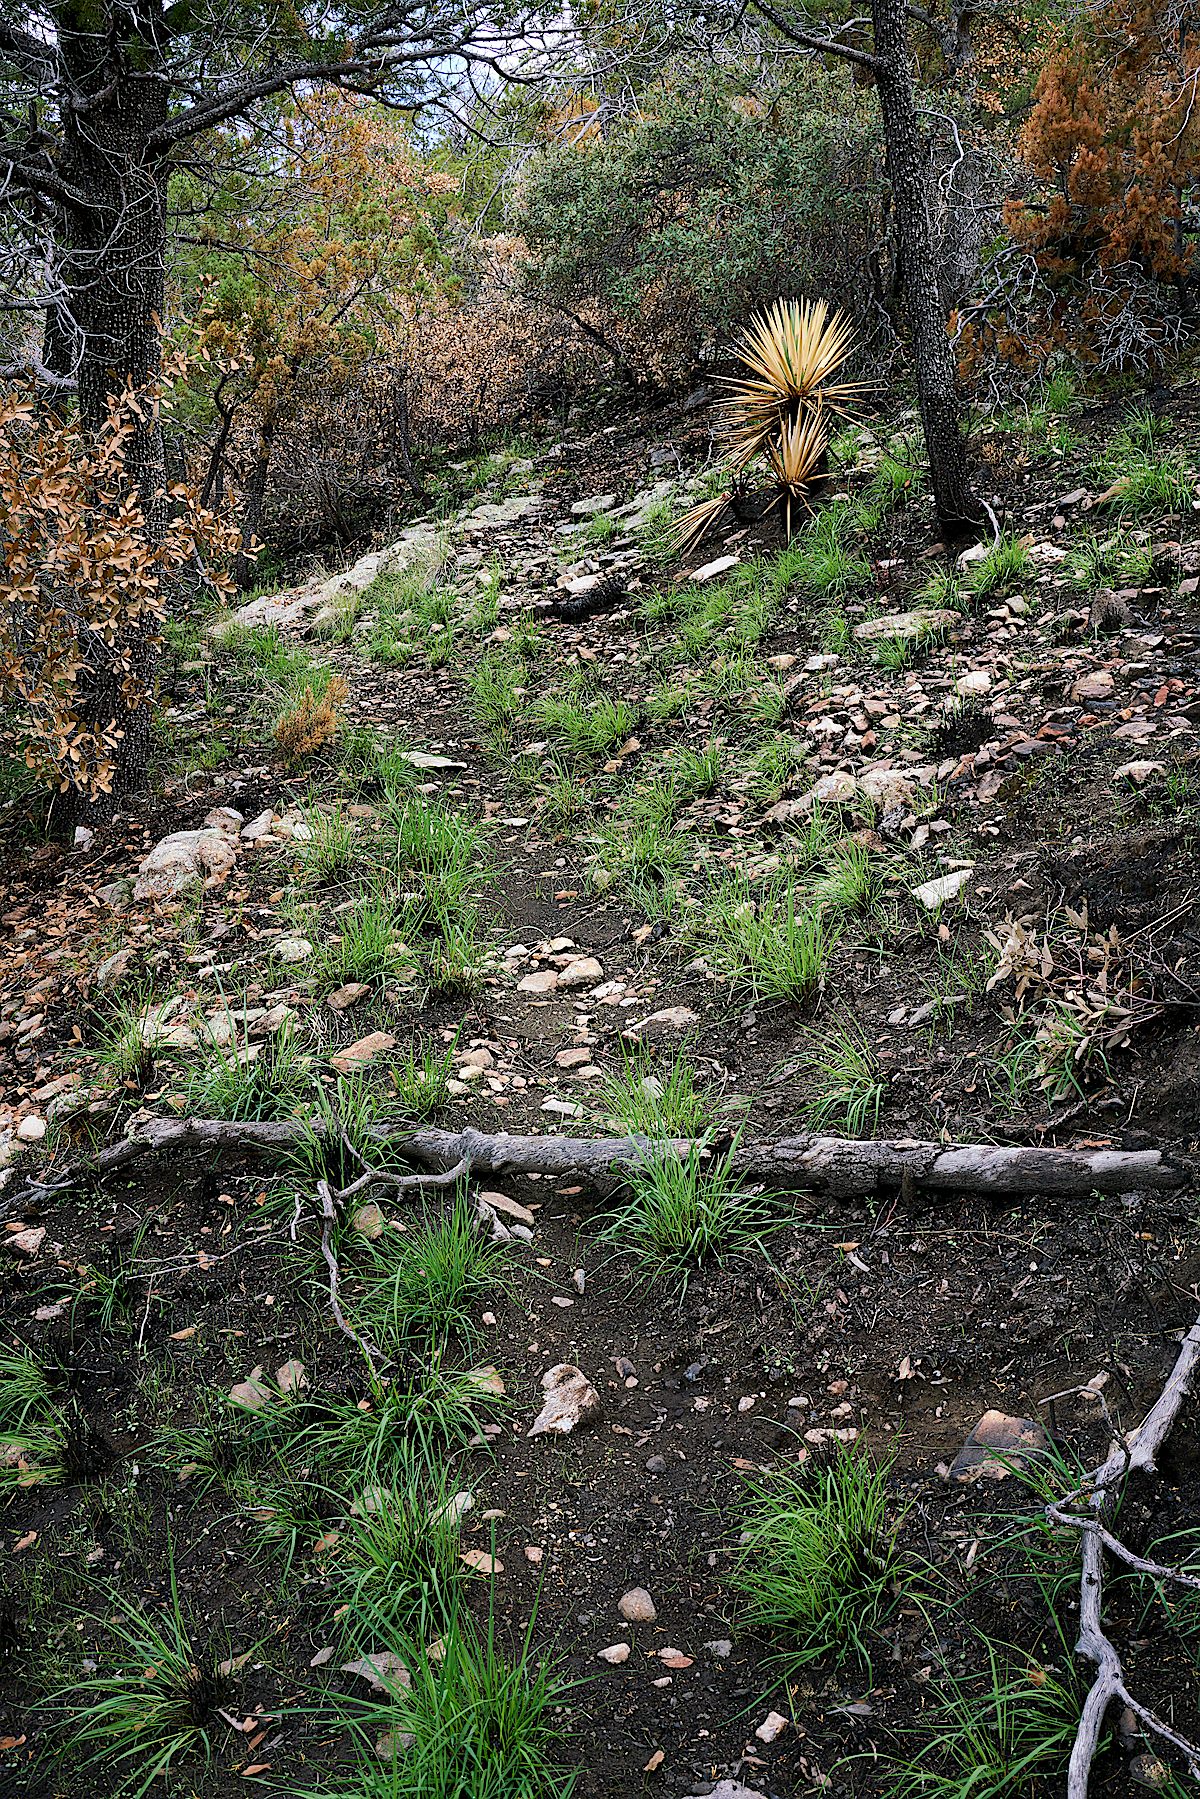 New grass growing just weeks after the Burro Fire - a lower section of the Upper Brush Corral Trail burned in the 2017 Burro Fire. July 2017.